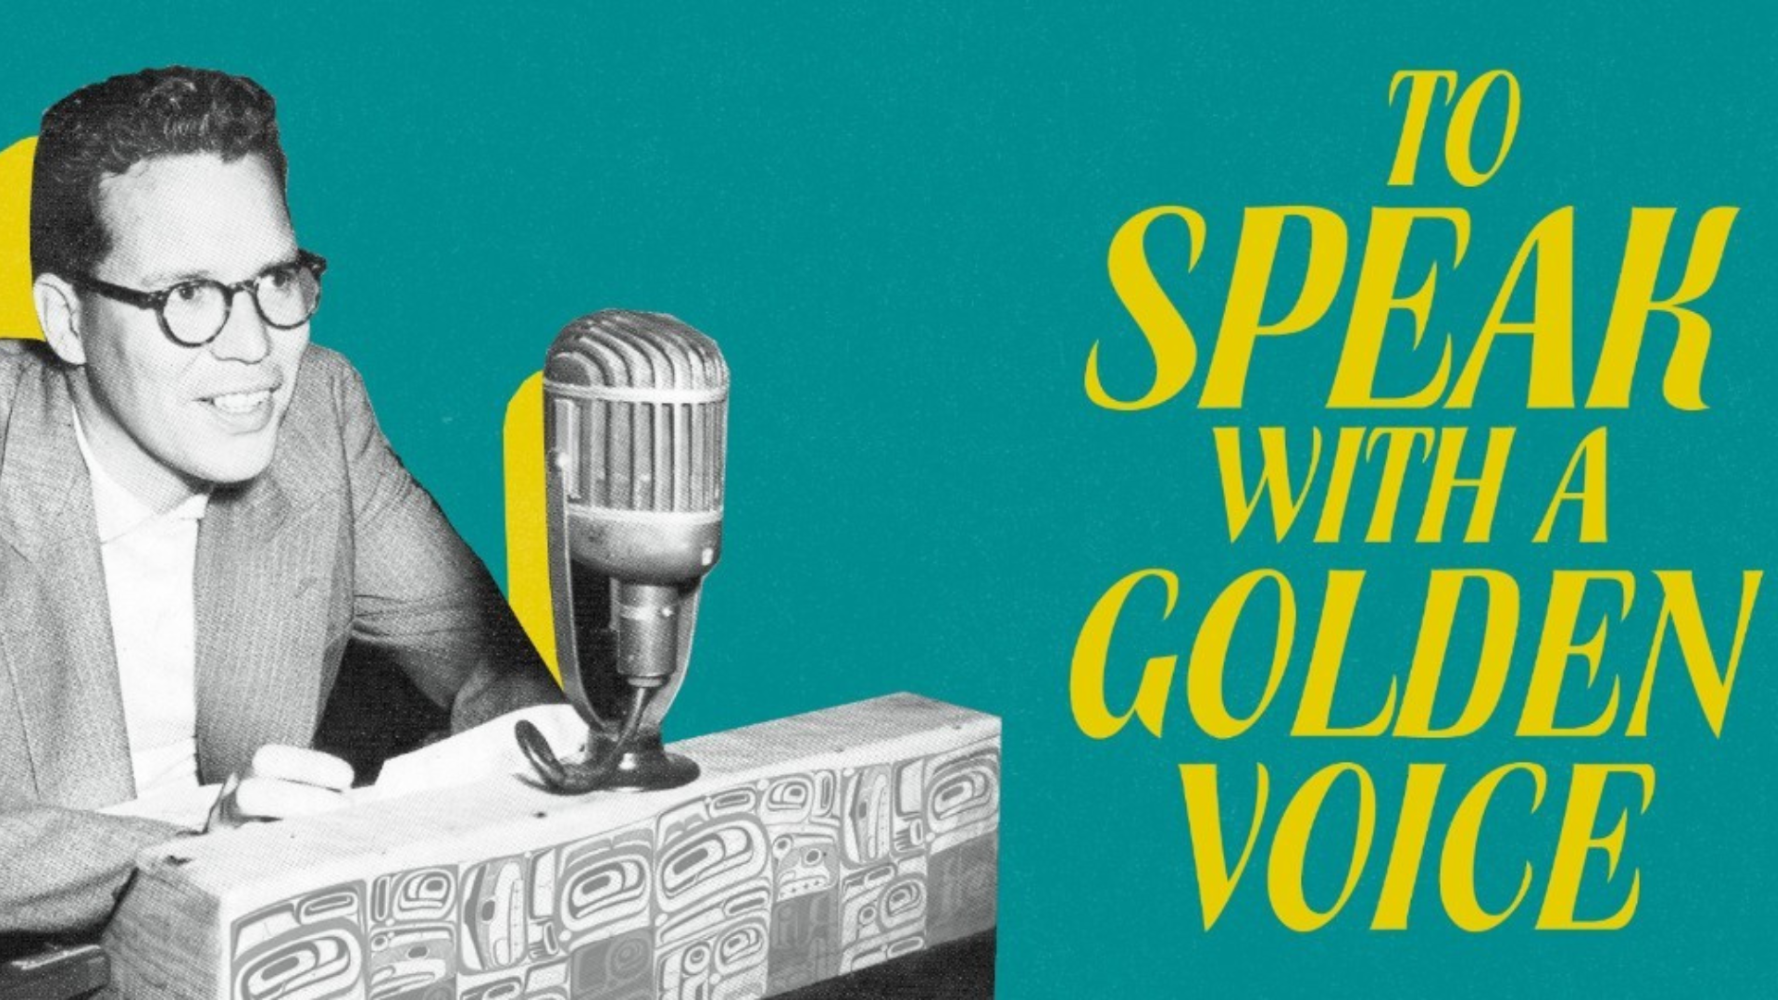 A teal background features a black-and-white archival photo of Bill Reid during his time as a CBC broadcaster. A yellow cursive text on the right reads, "To Speak With a Golden Voice." This image is courtesy of the Bill Reid Gallery of Northwest Coast Art.